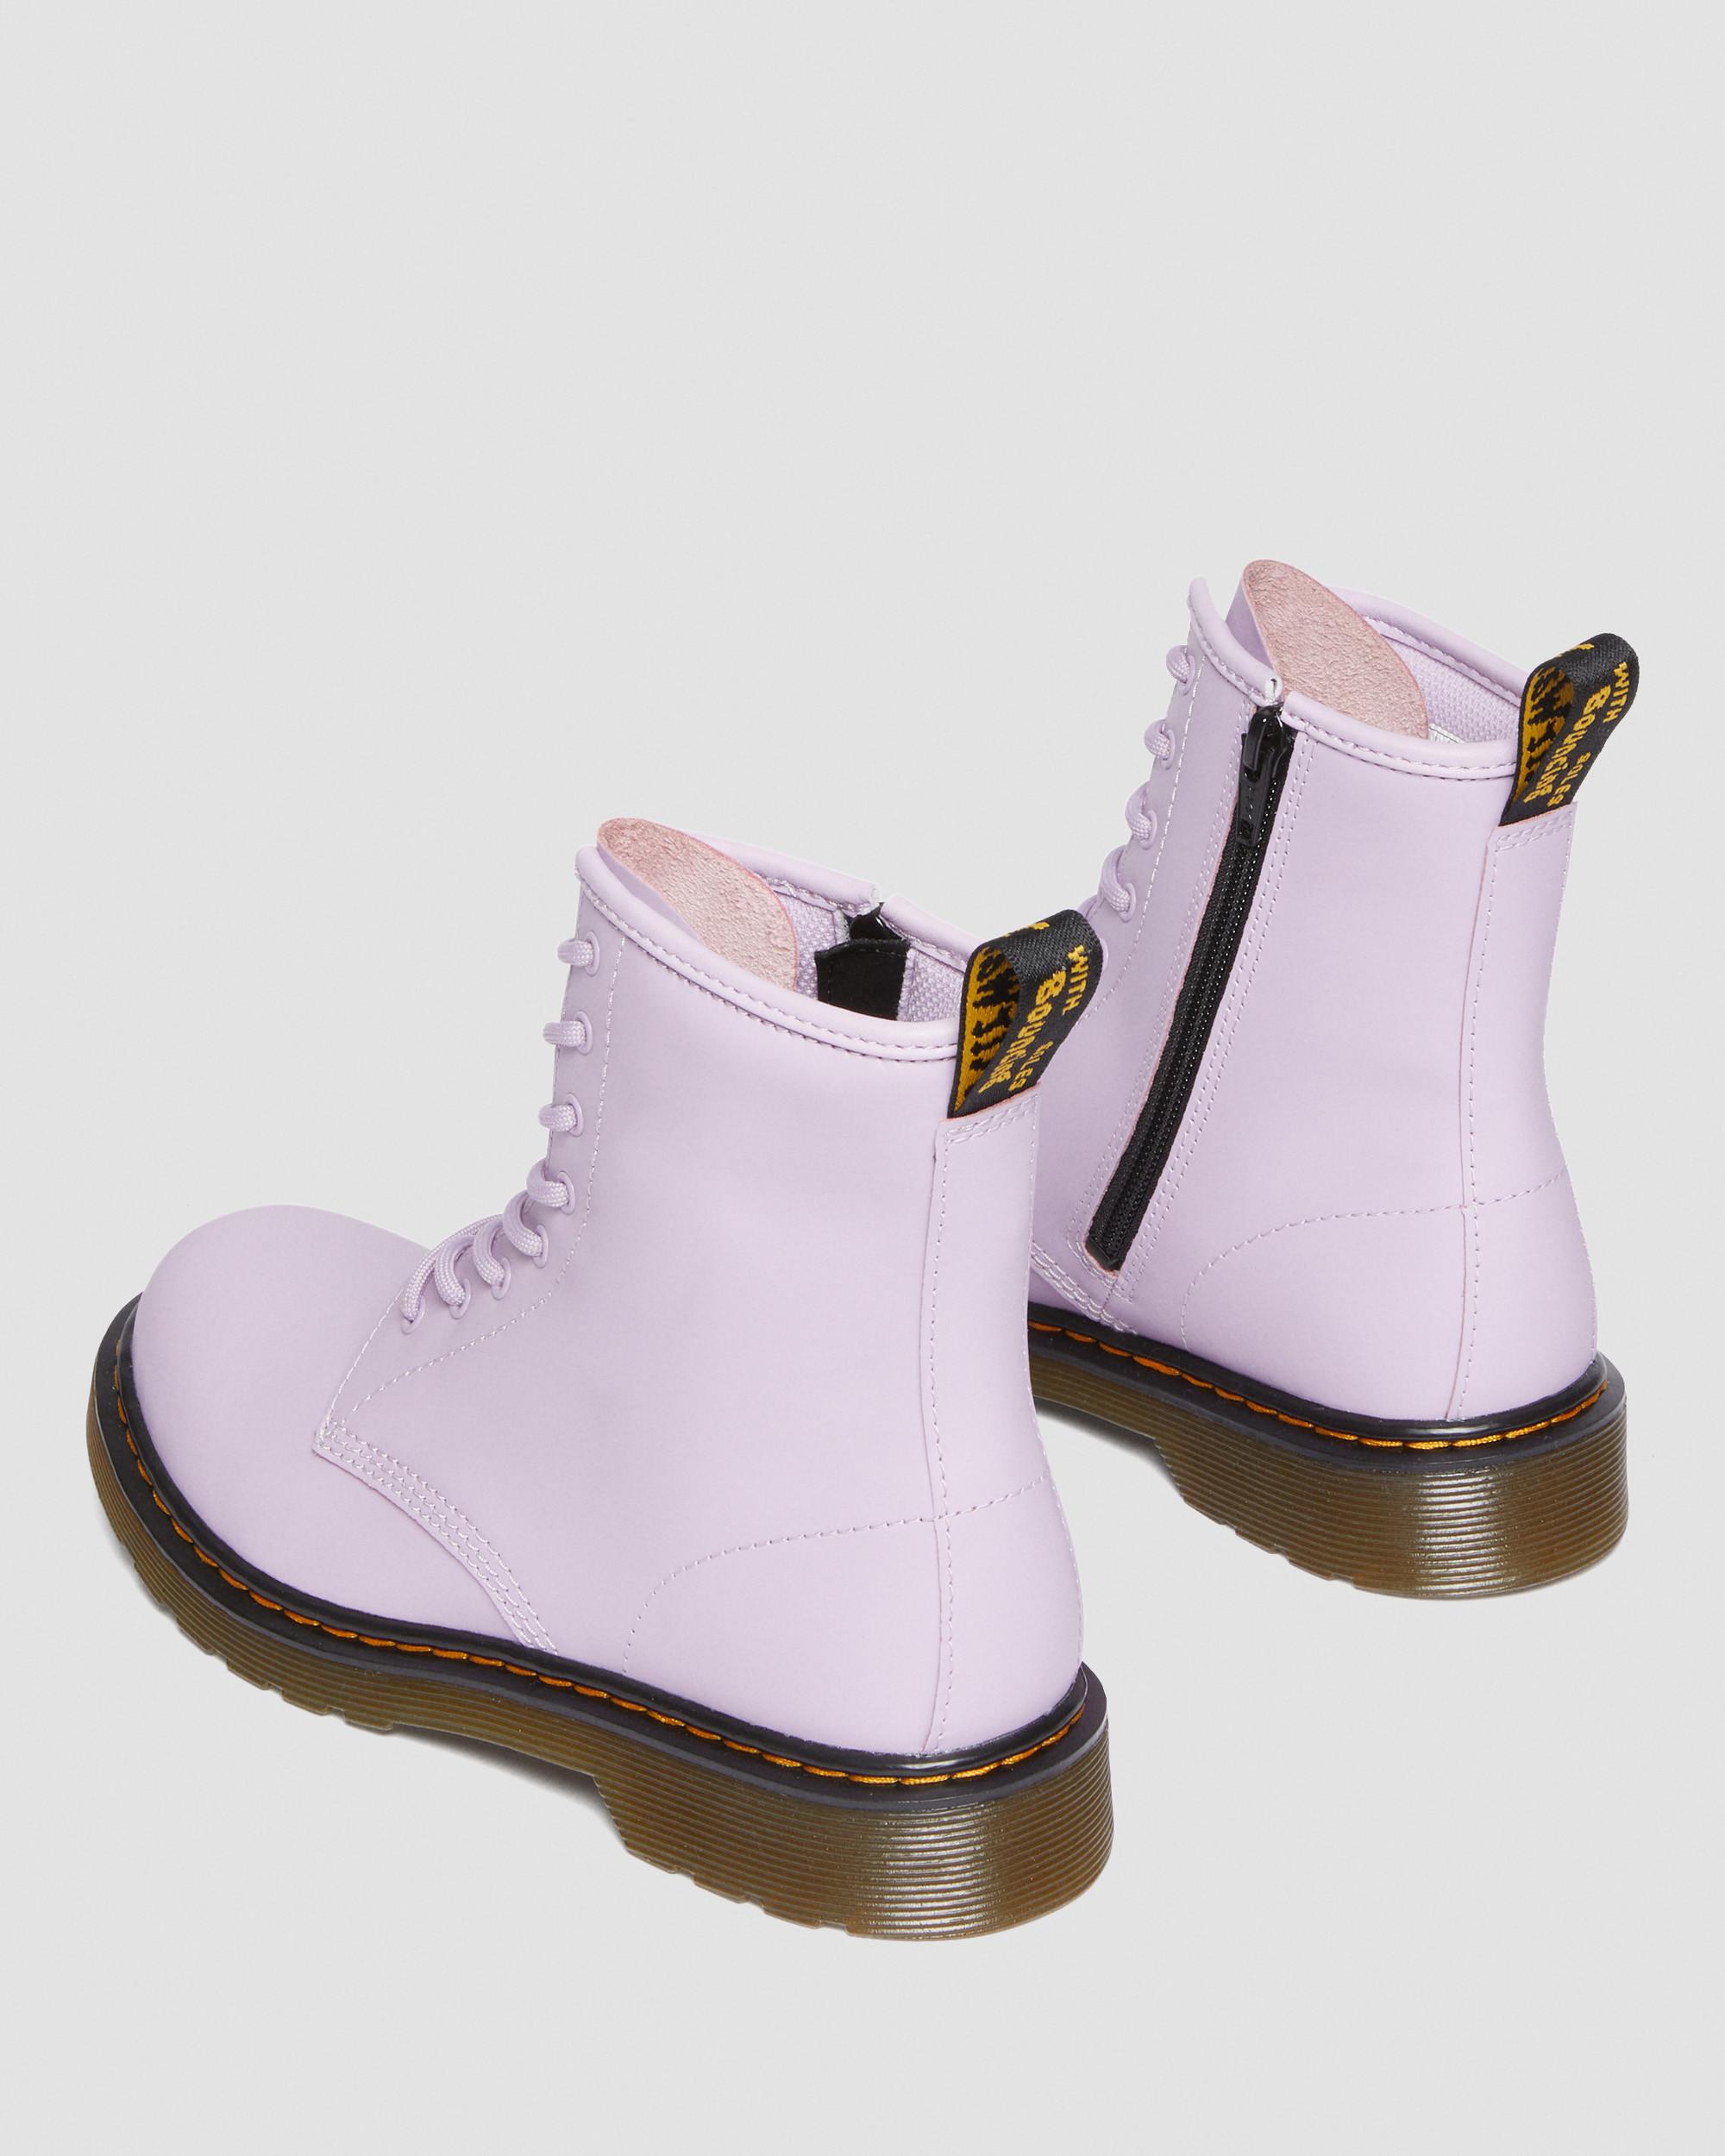 Youth 1460 in | Martens Up Leather Dr. Boots Romario Lilac Lace